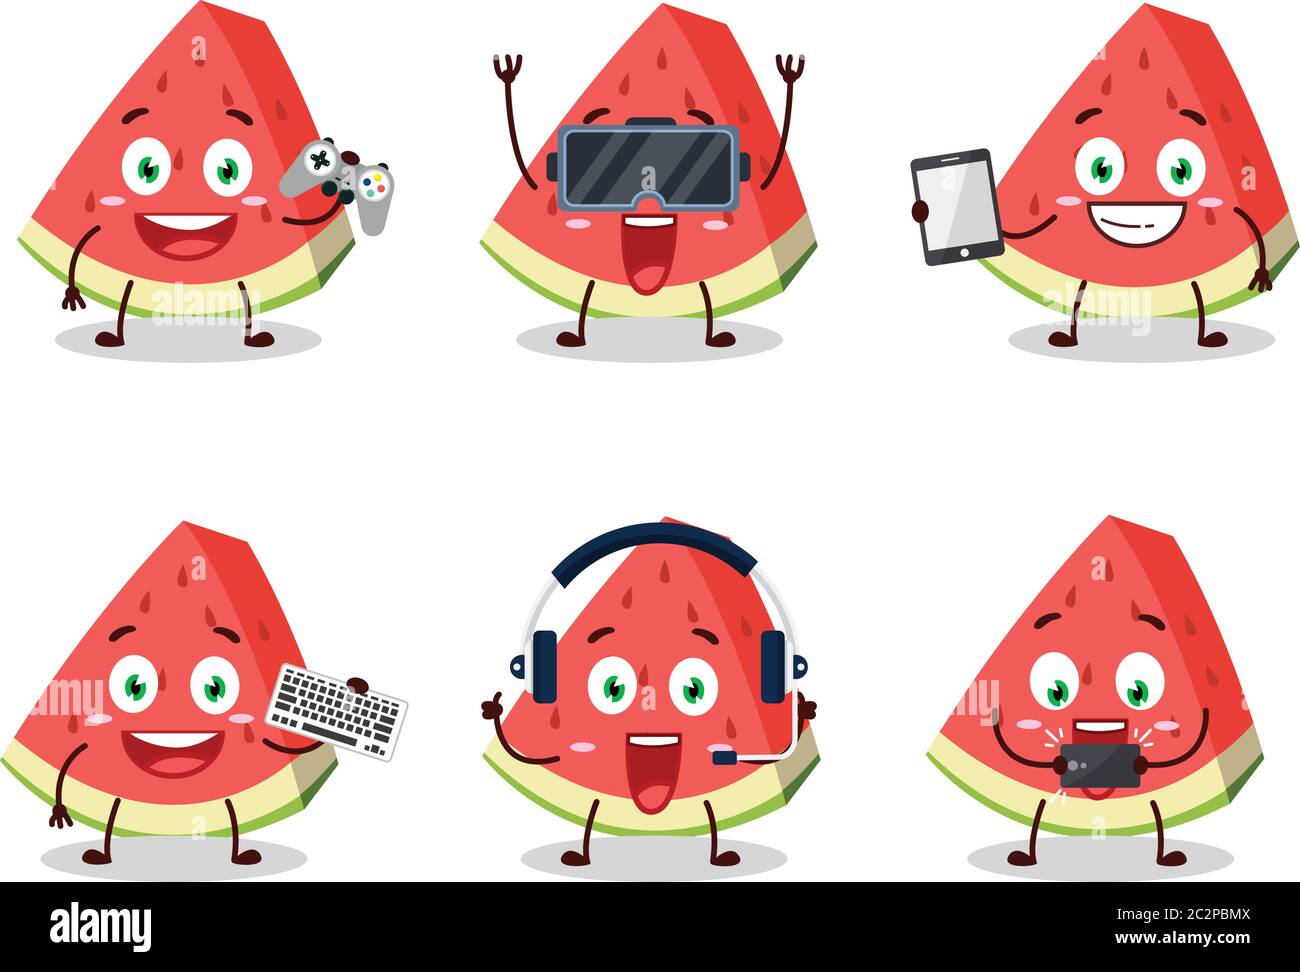 Slash of watermelon cartoon character are playing games with various cute emoticons Stock Vector